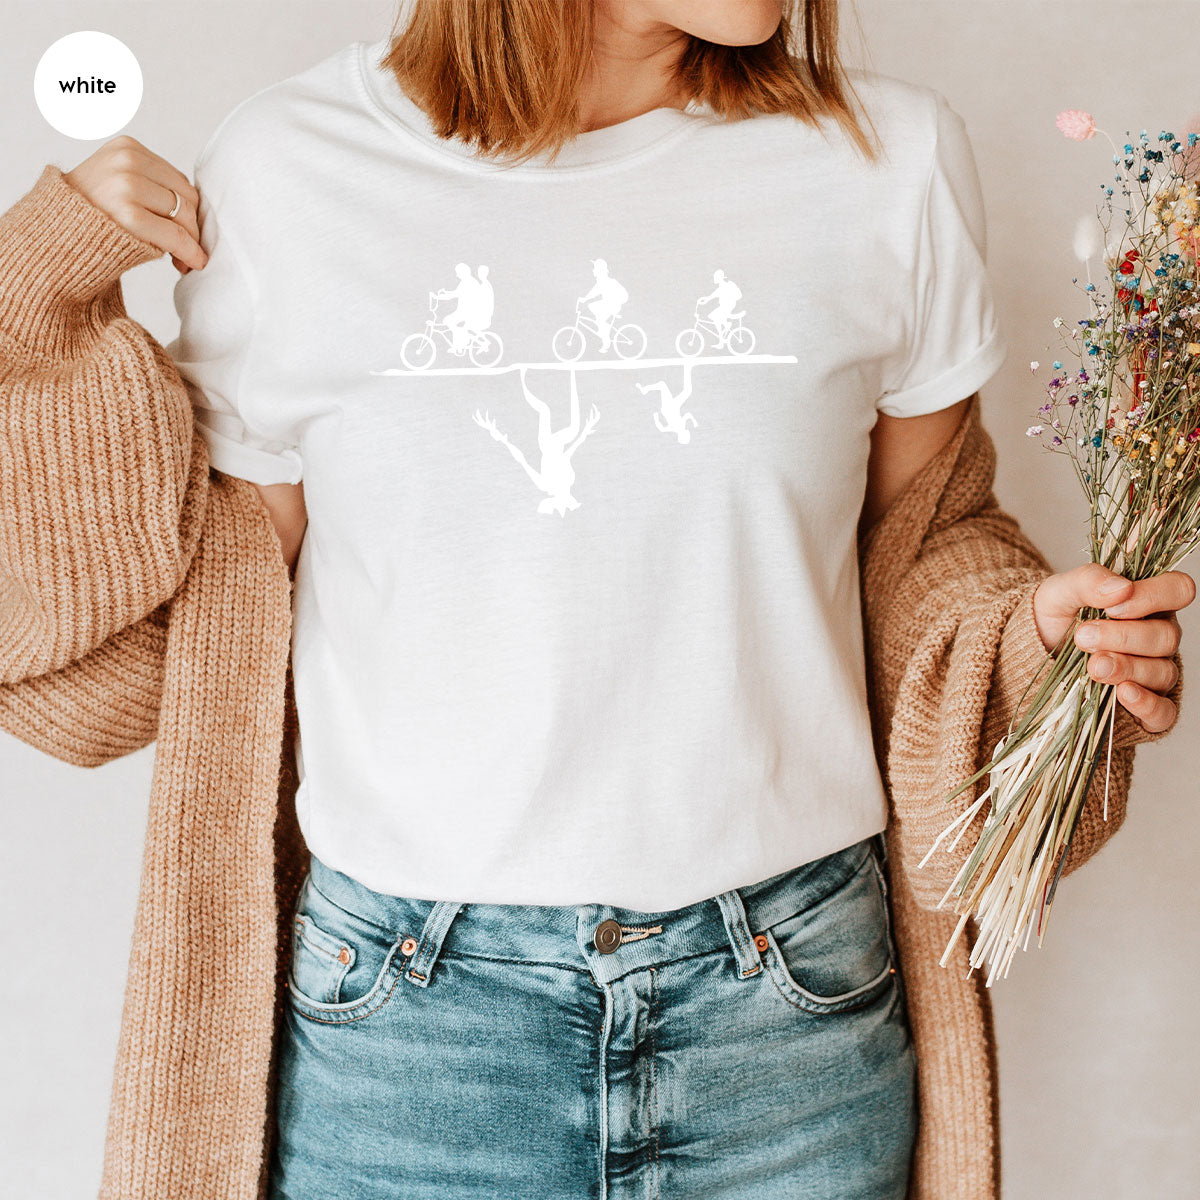 Bicycle T-Shirt, Funny Bicycle Shirt, Family Weekend With Bicycle Tee